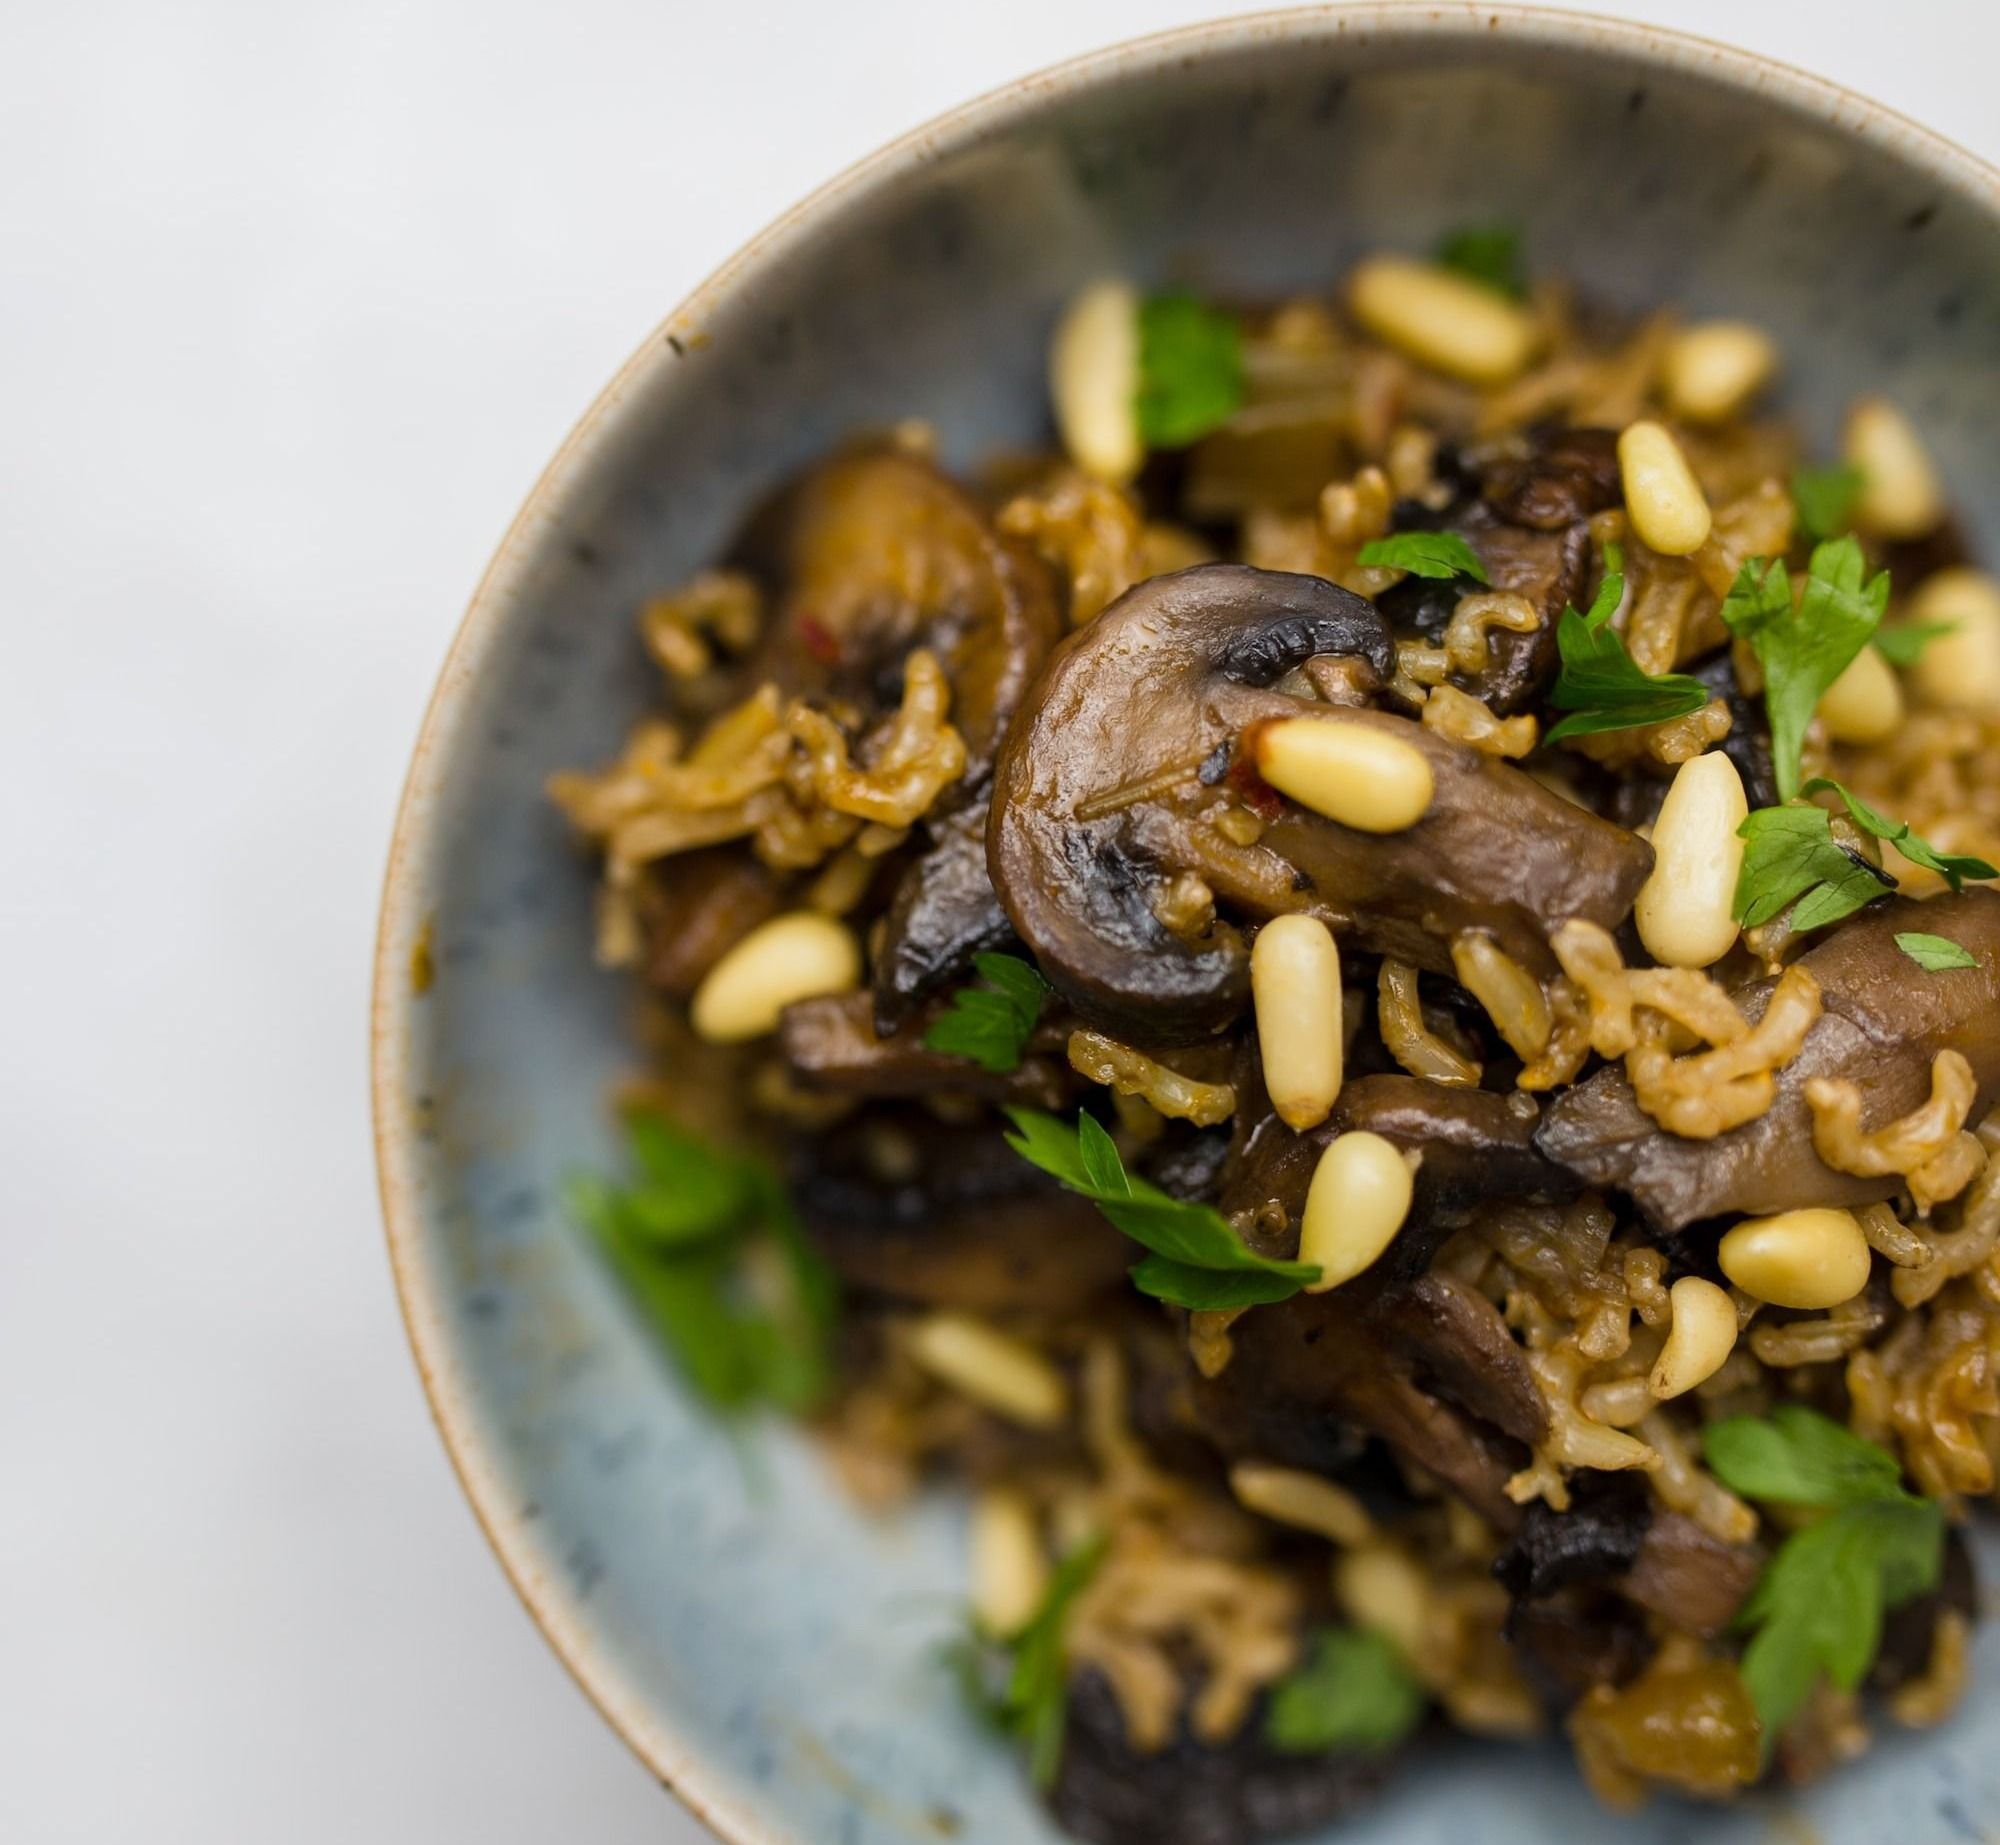 Pine nuts on savory dishes